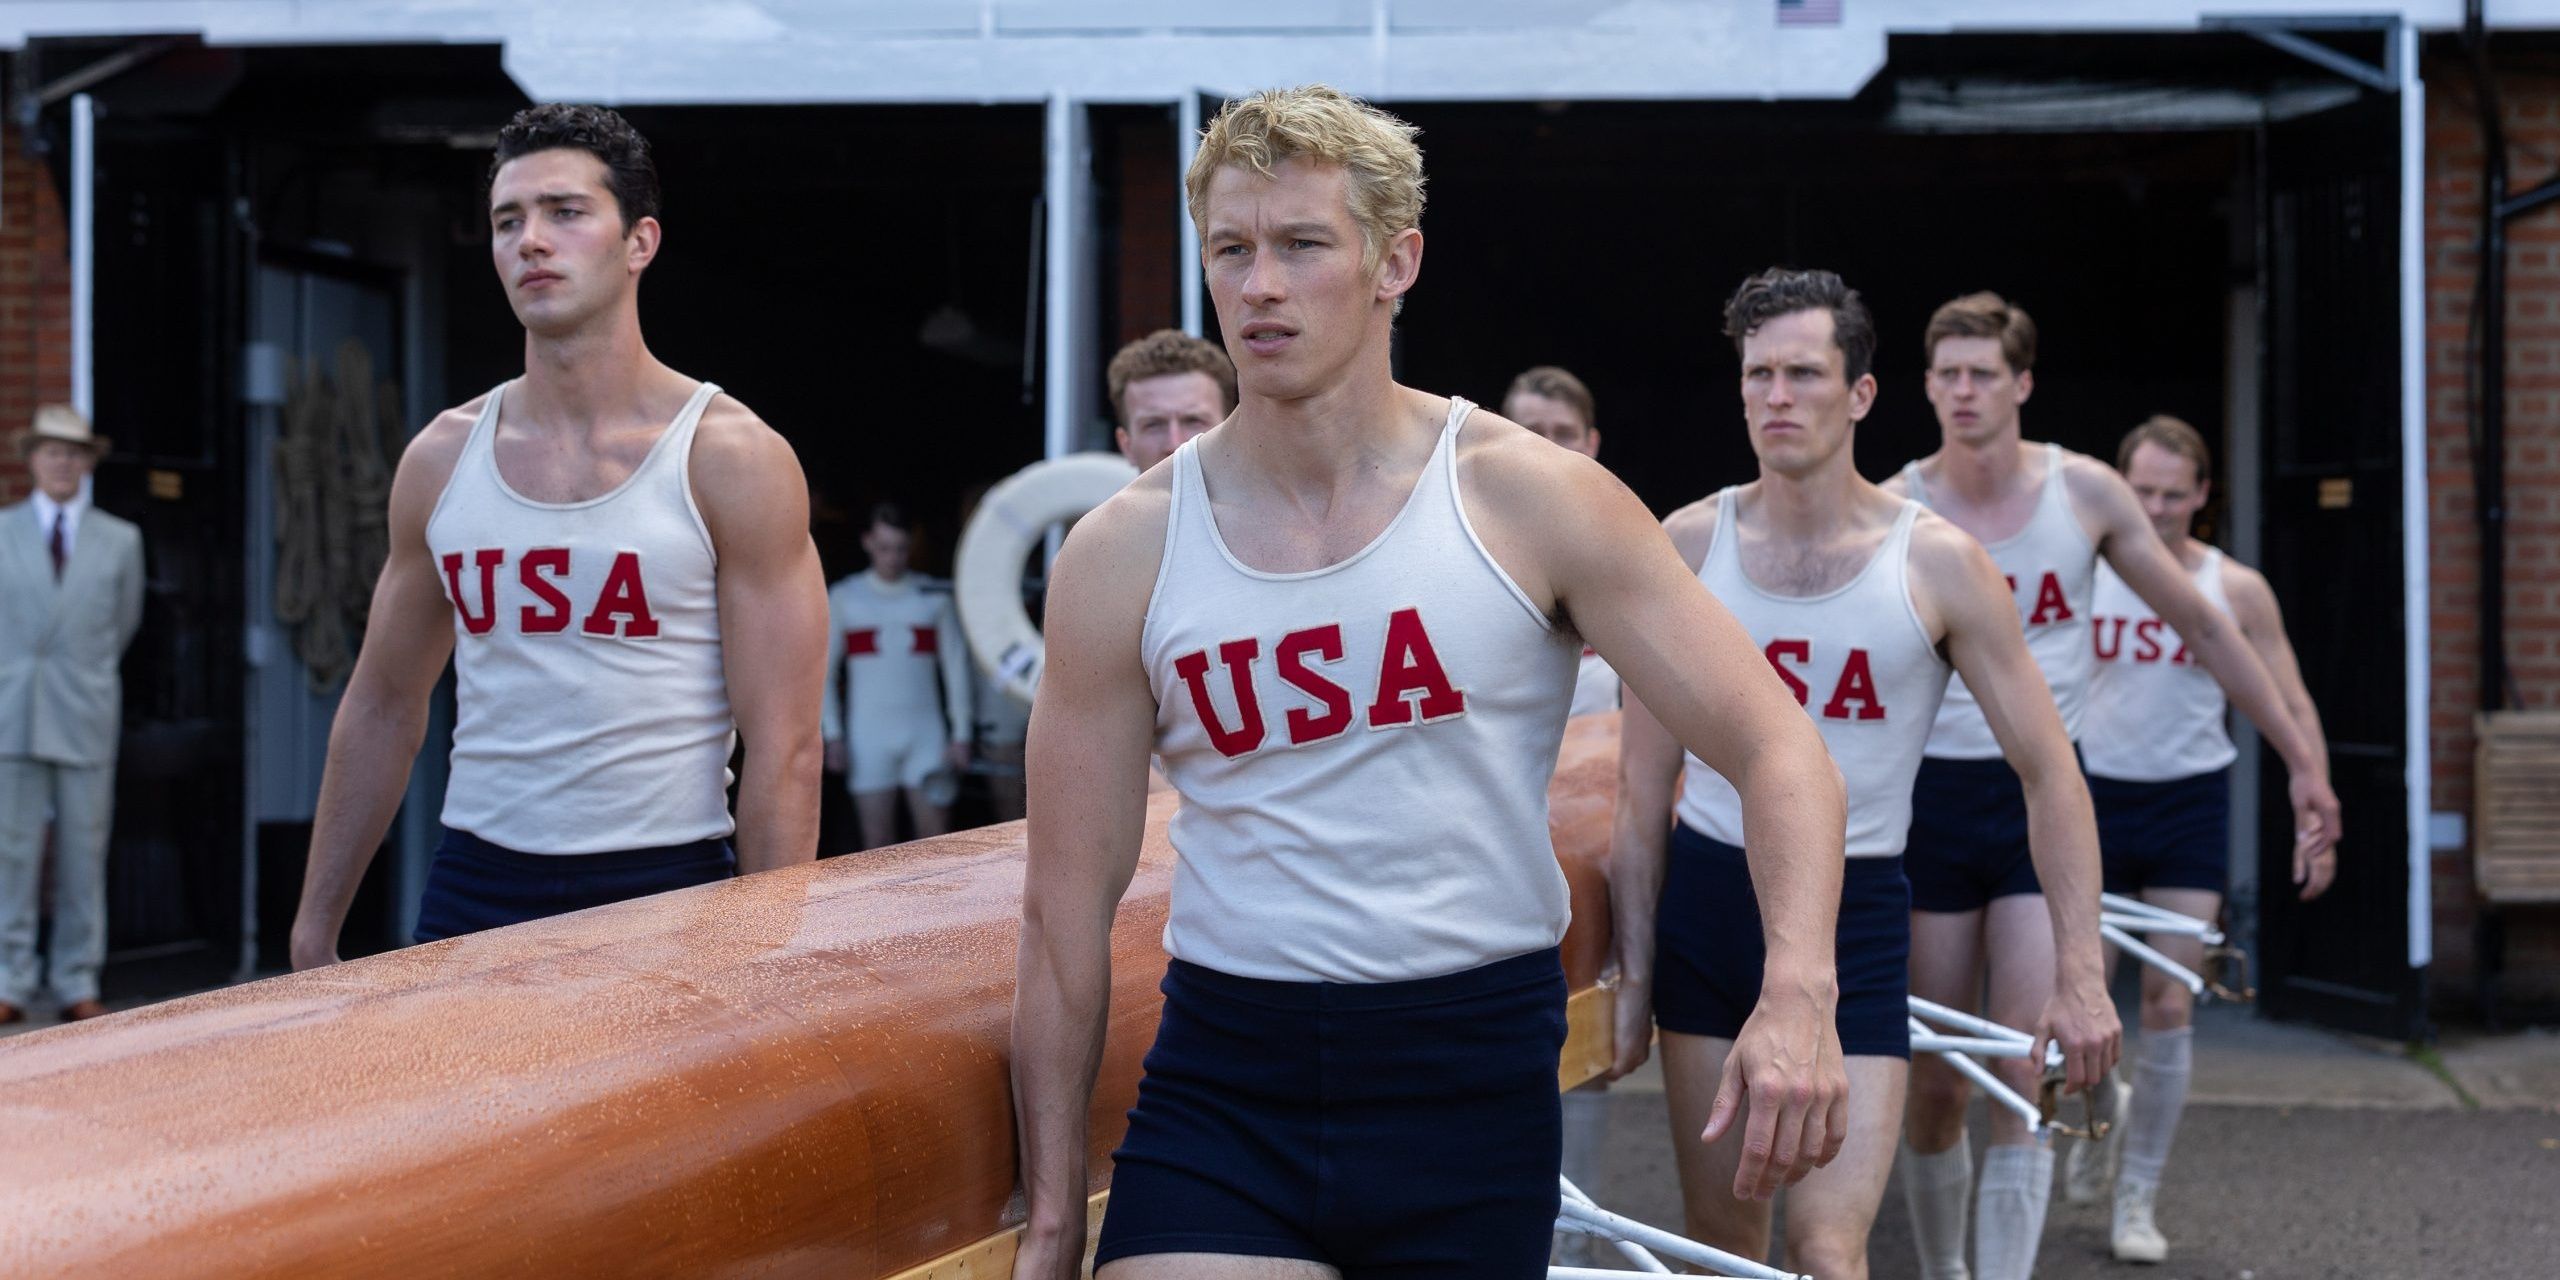 Callum Turner as Joe Rantz and the University of Washington Rowing team in The Boys in the Boat